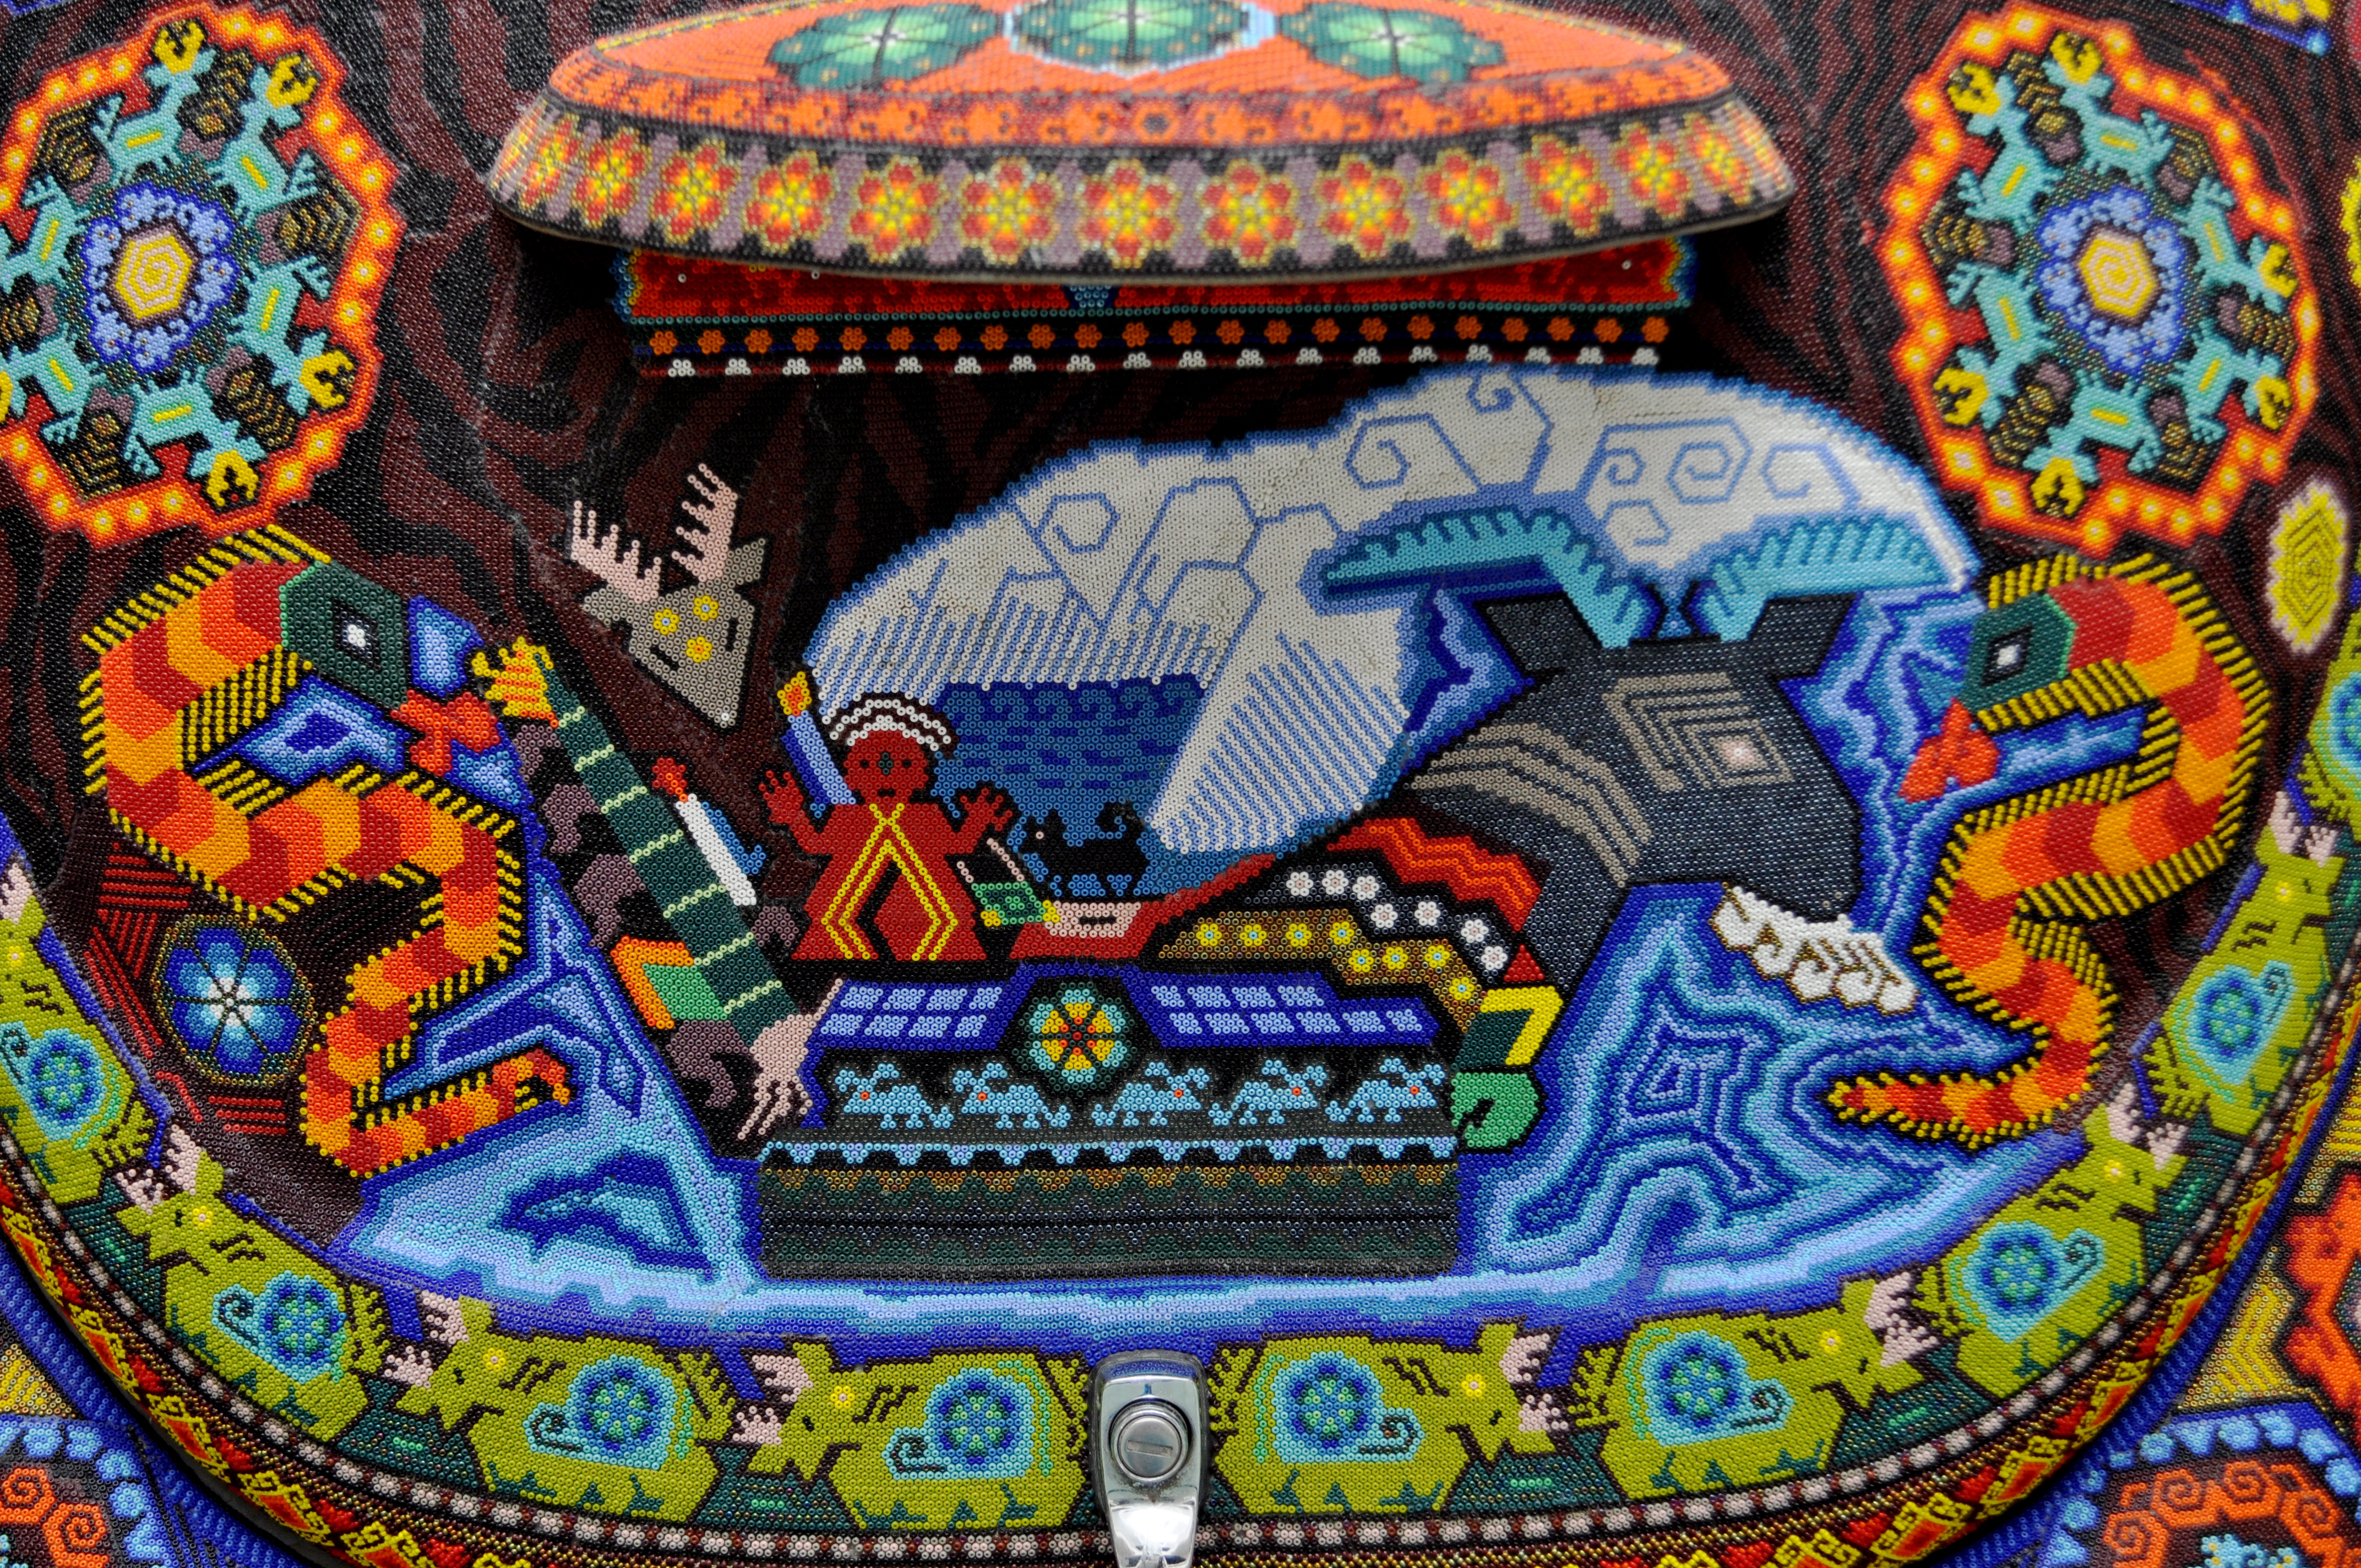 Traditional Huichol beadwork. Image from Creative Commons, by Katie Bordner